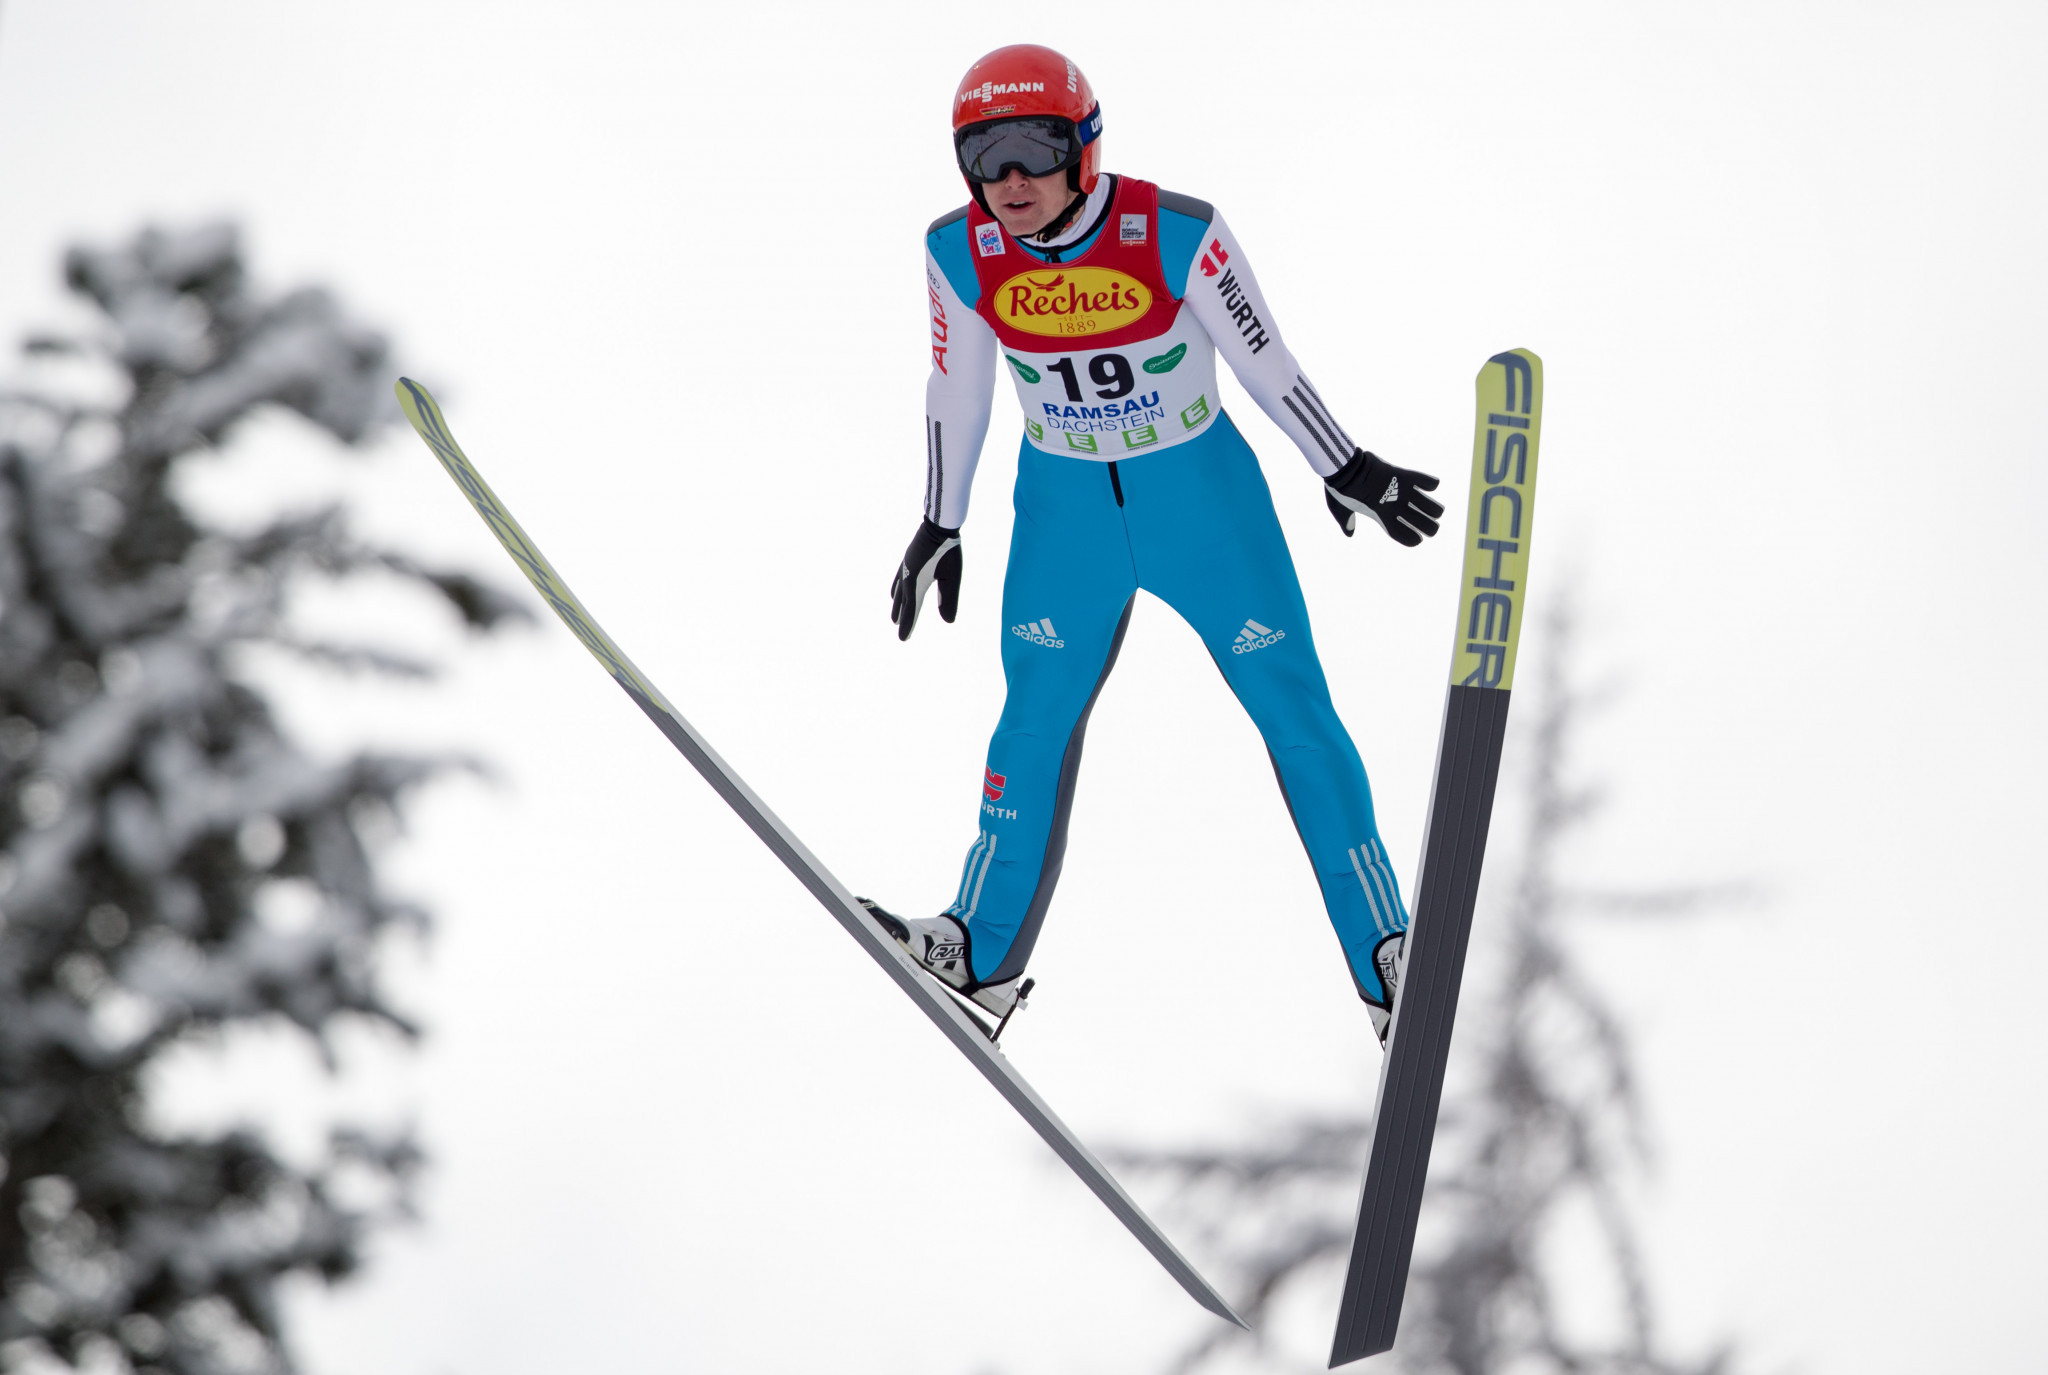 Geiger and Frenzel take victory for Germany in team sprint at FIS Nordic Combined World Cup